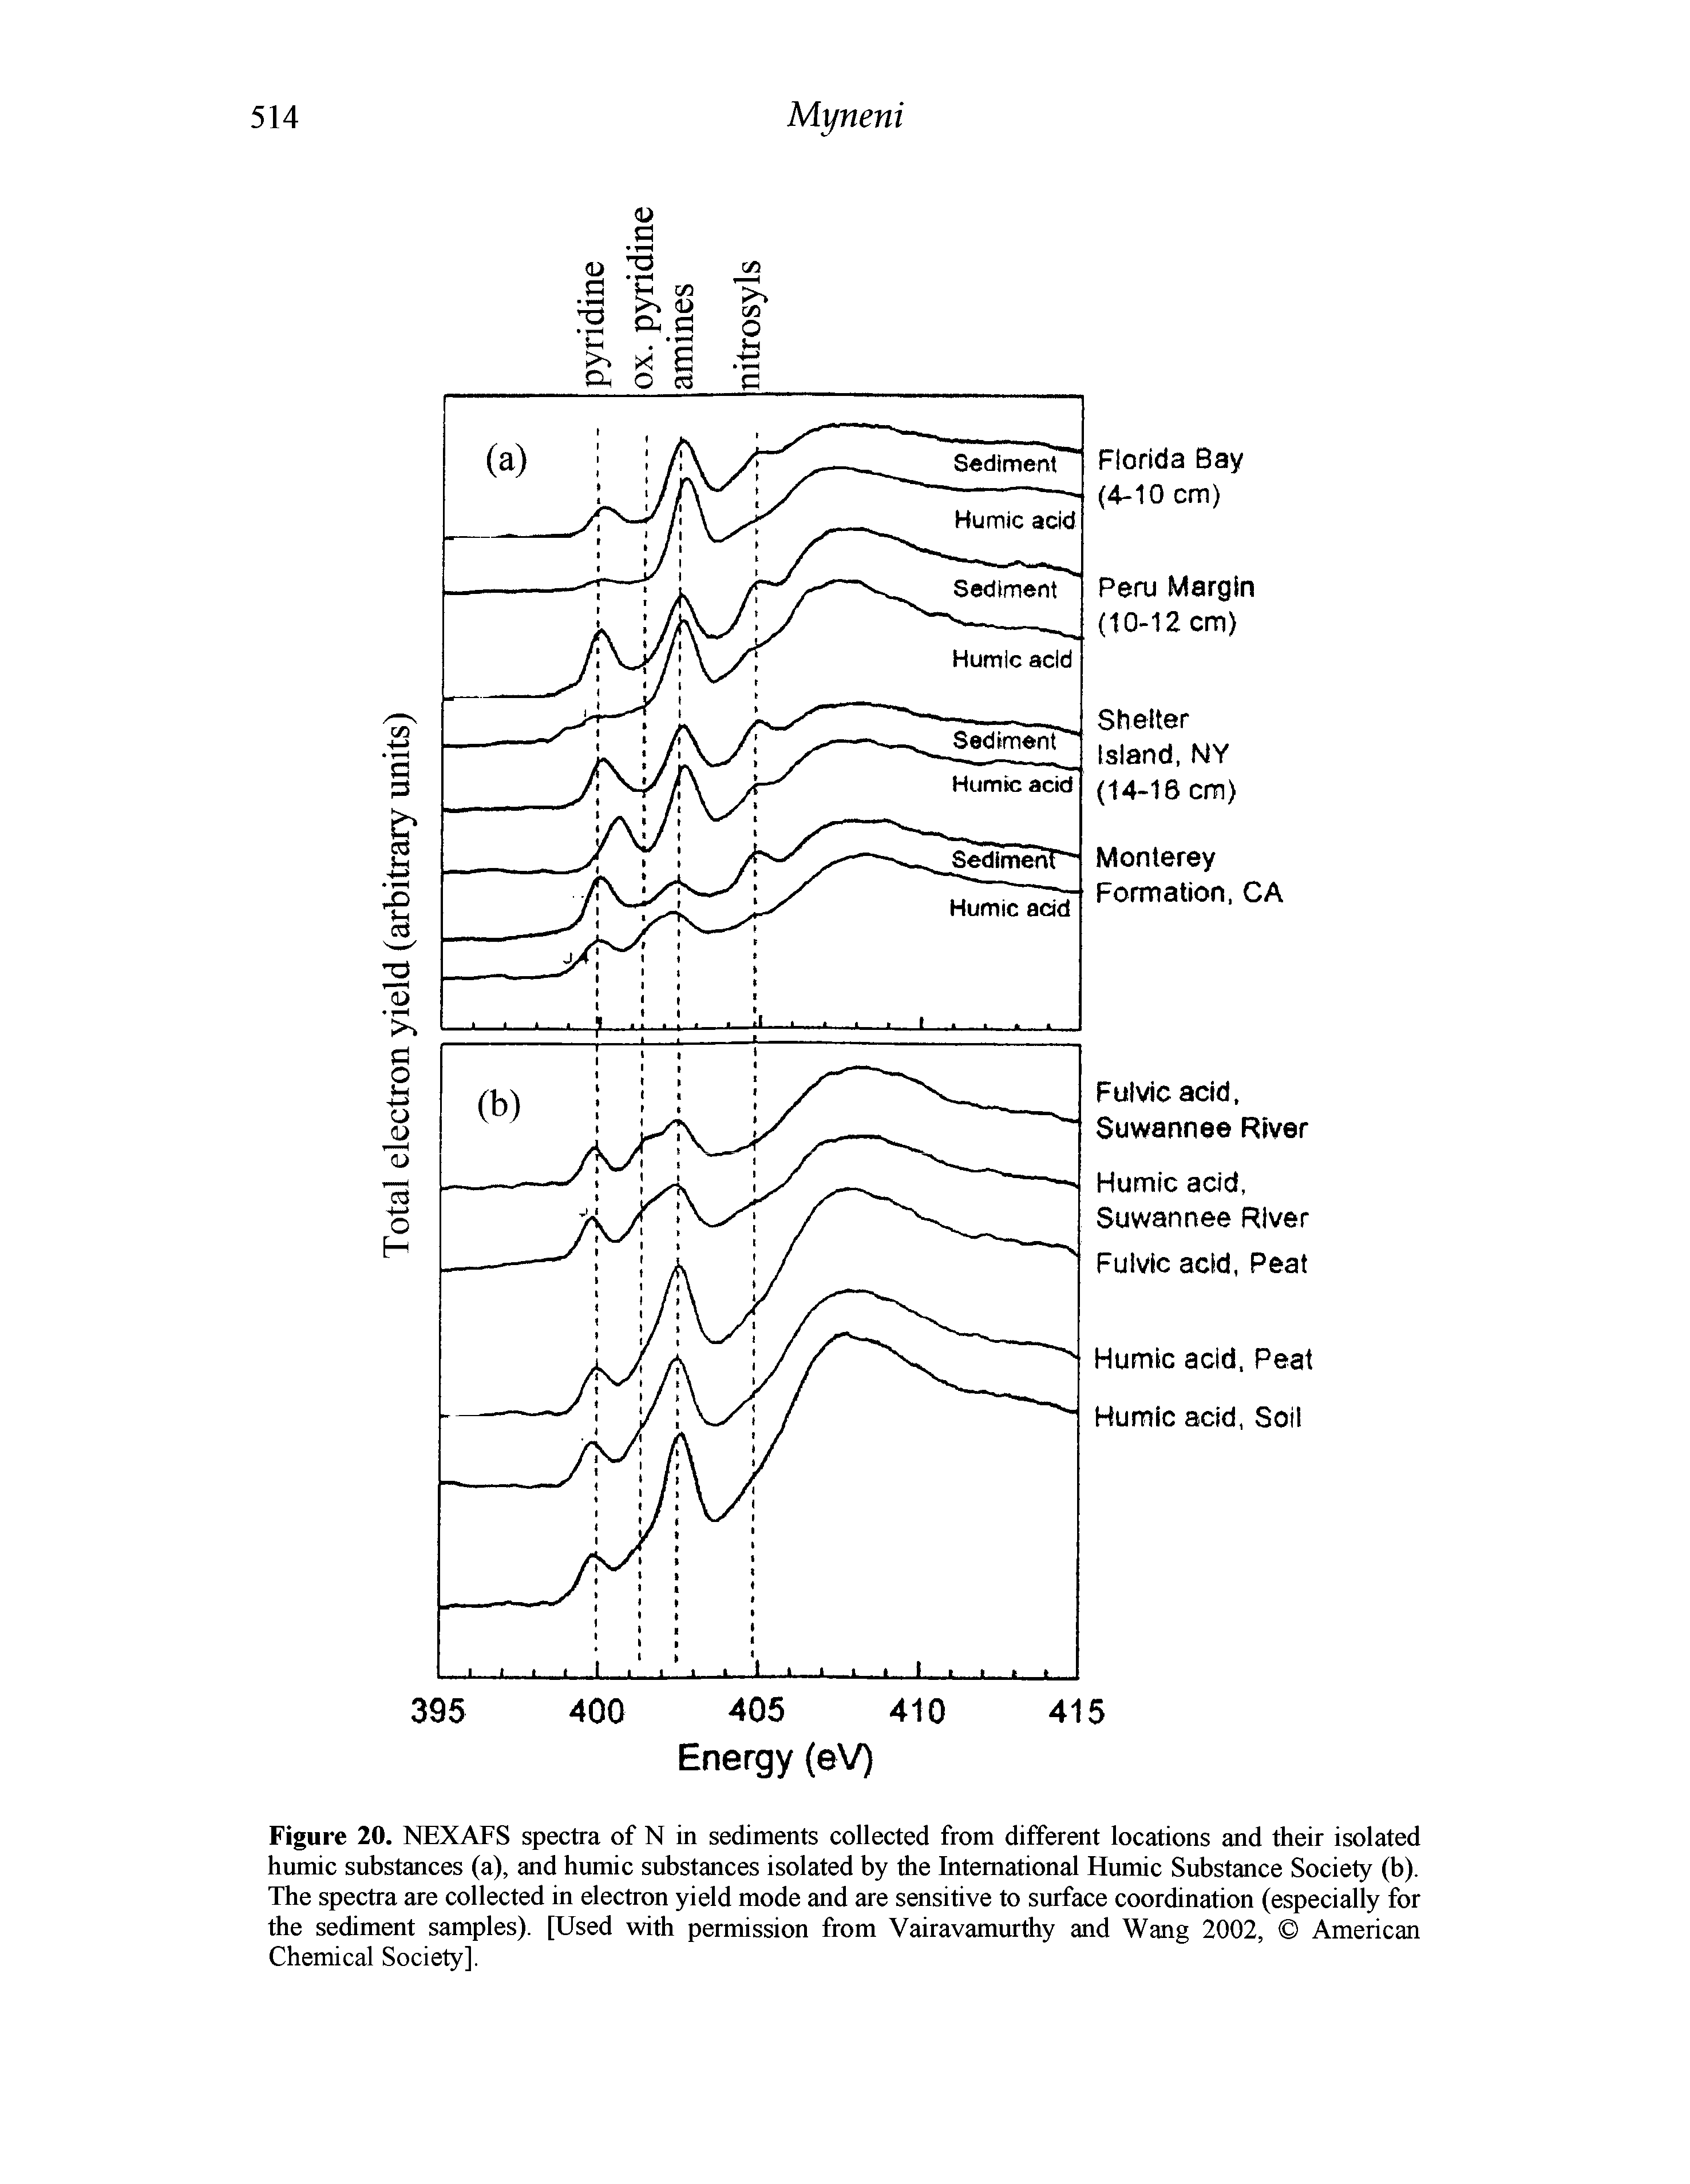 Figure 20. NEXAFS spectra of N in sediments collected from different locations and their isolated humic substances (a), and humic substances isolated by the International Humic Substance Society (b). The spectra are collected in electron yield mode and are sensitive to surface coordination (especially for the sediment samples). [Used with permission from Vairavamurthy and Wang 2002, American Chemical Society],...